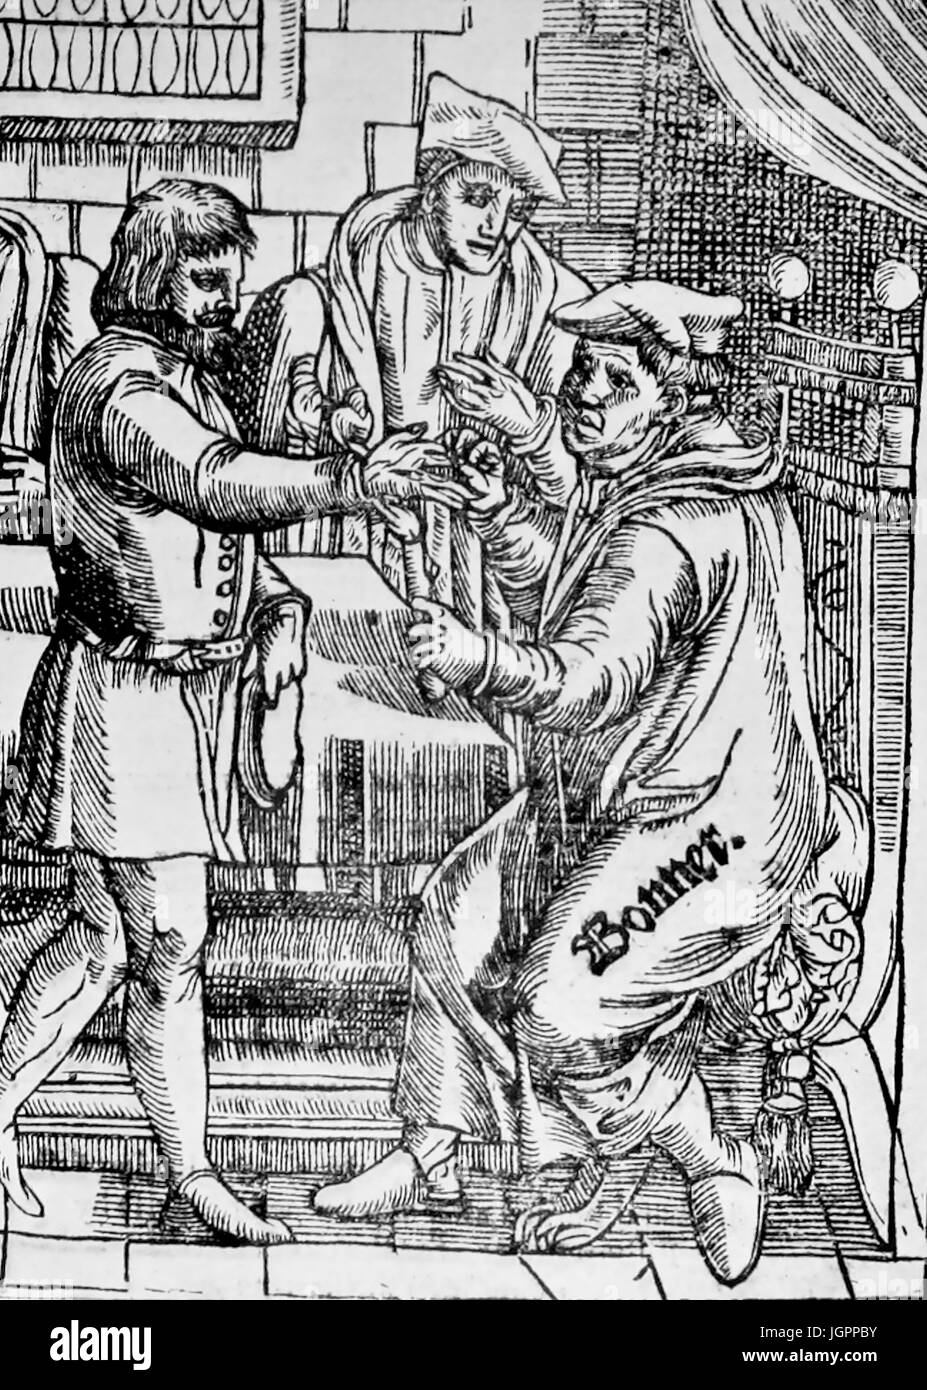 EDMUND BONNER (c 1500-1569) Bishop of London. Bonner burning the hand of weaver Thomas Tomkins in 1554 in an effort to make him renounce his Protestant views. Tomkins was eventually burned at the stake in March 1555. Stock Photo